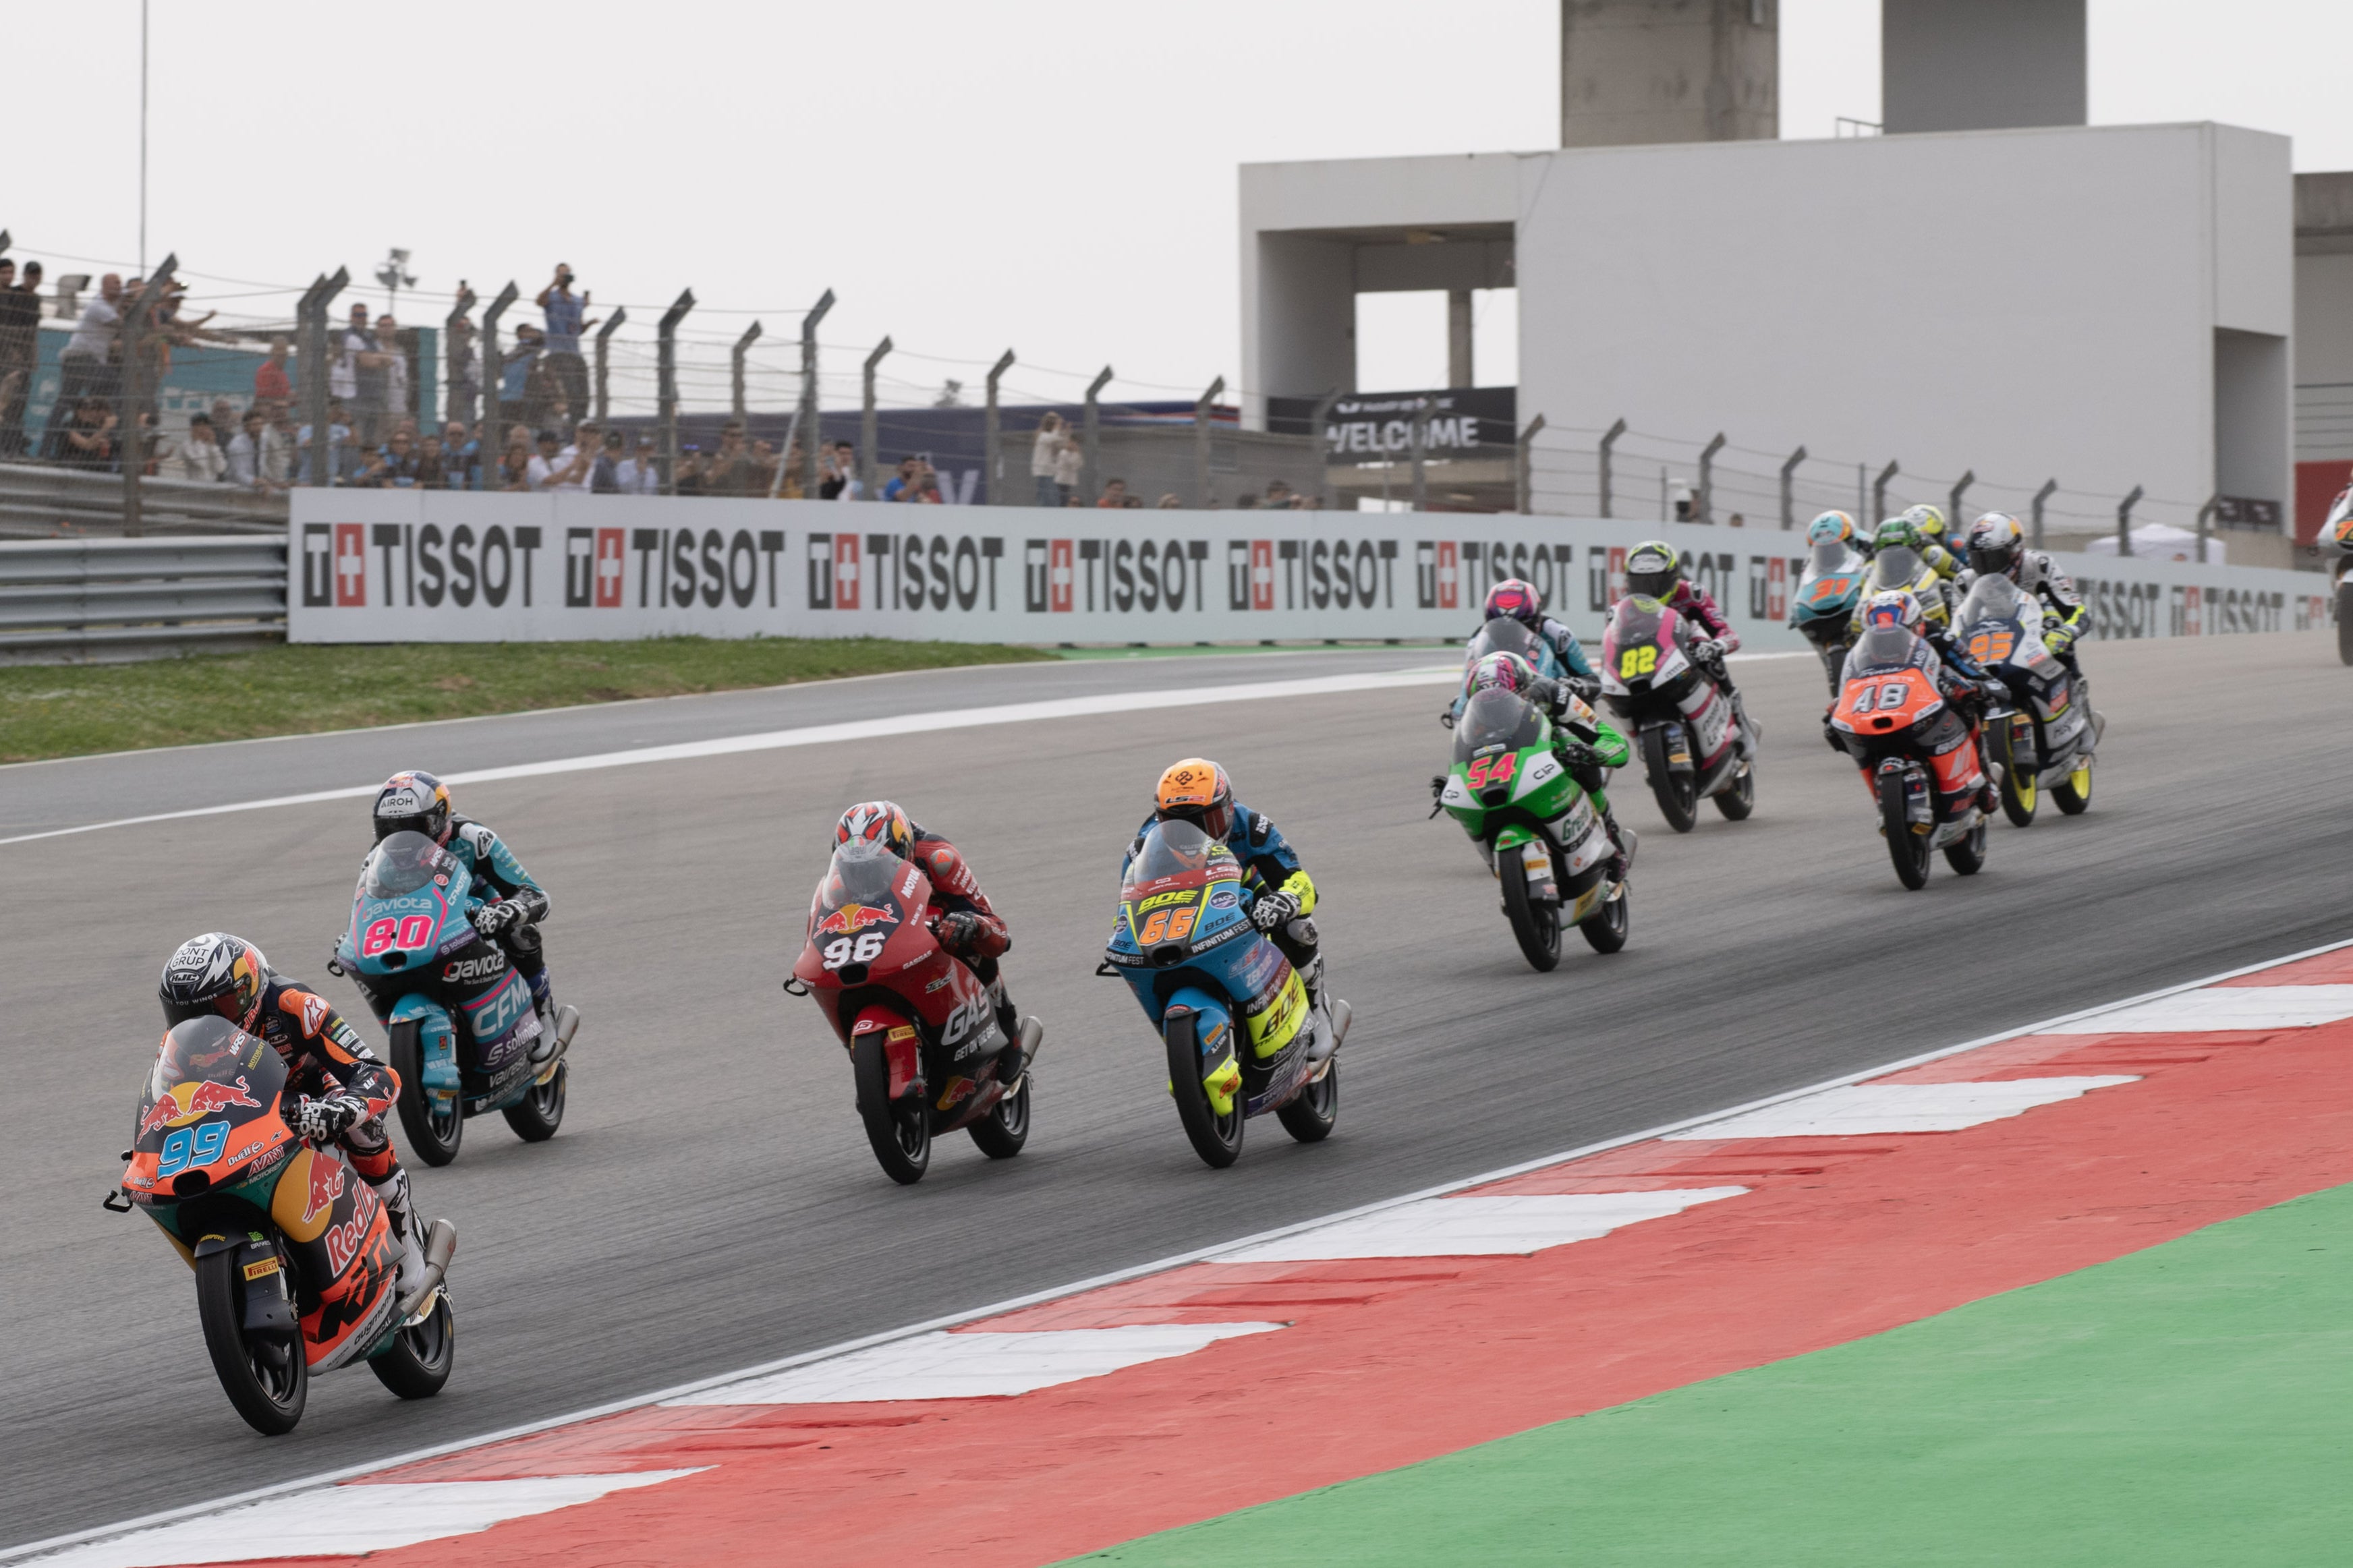 The deal for MotoGP is expected to be concluded by the end of the year